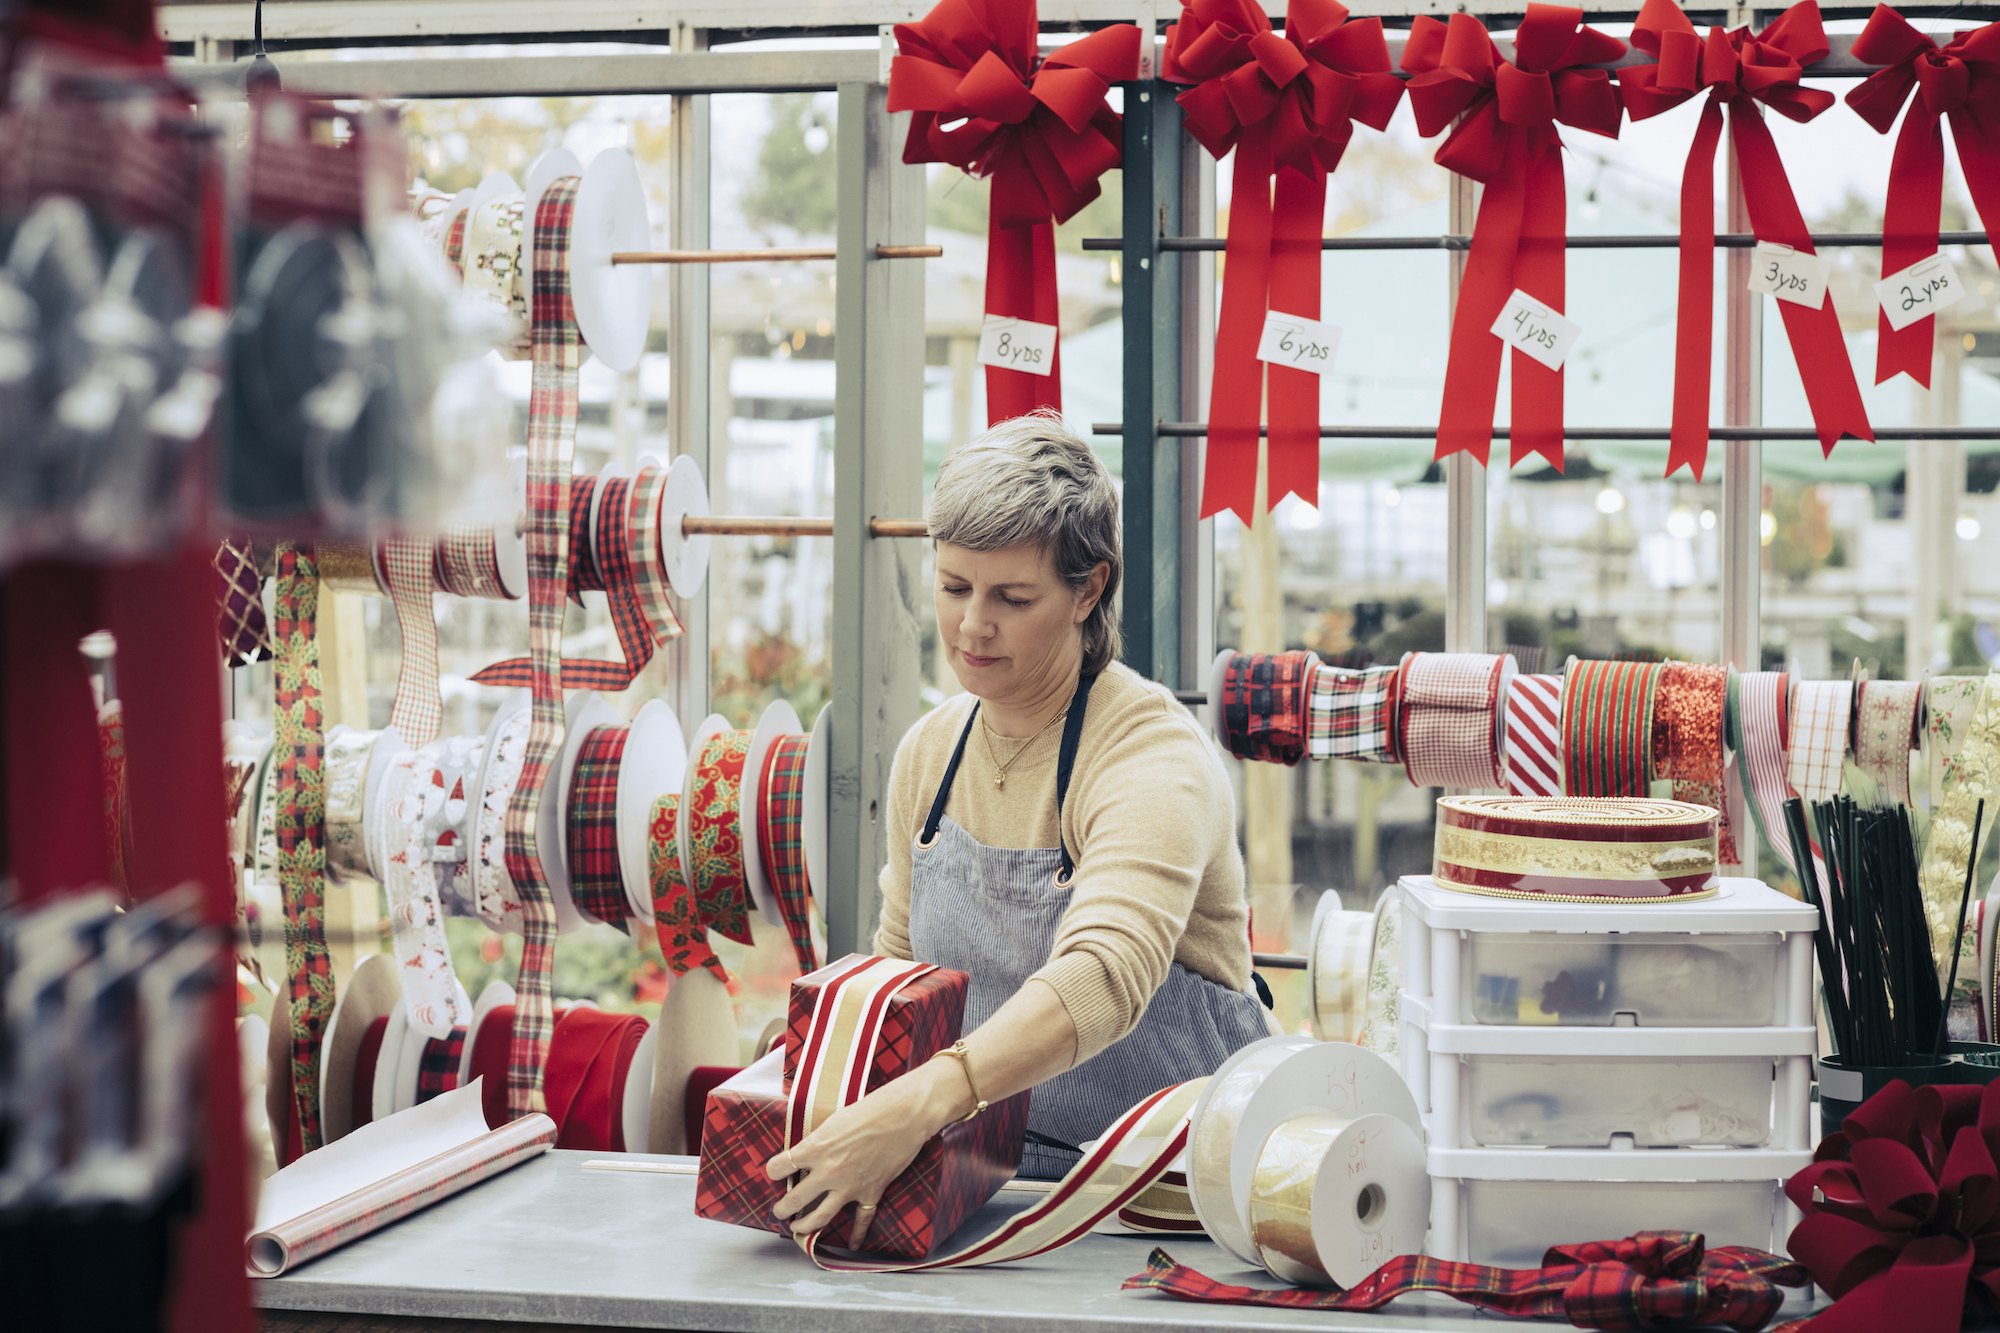 A woman wrapping presents in a shop